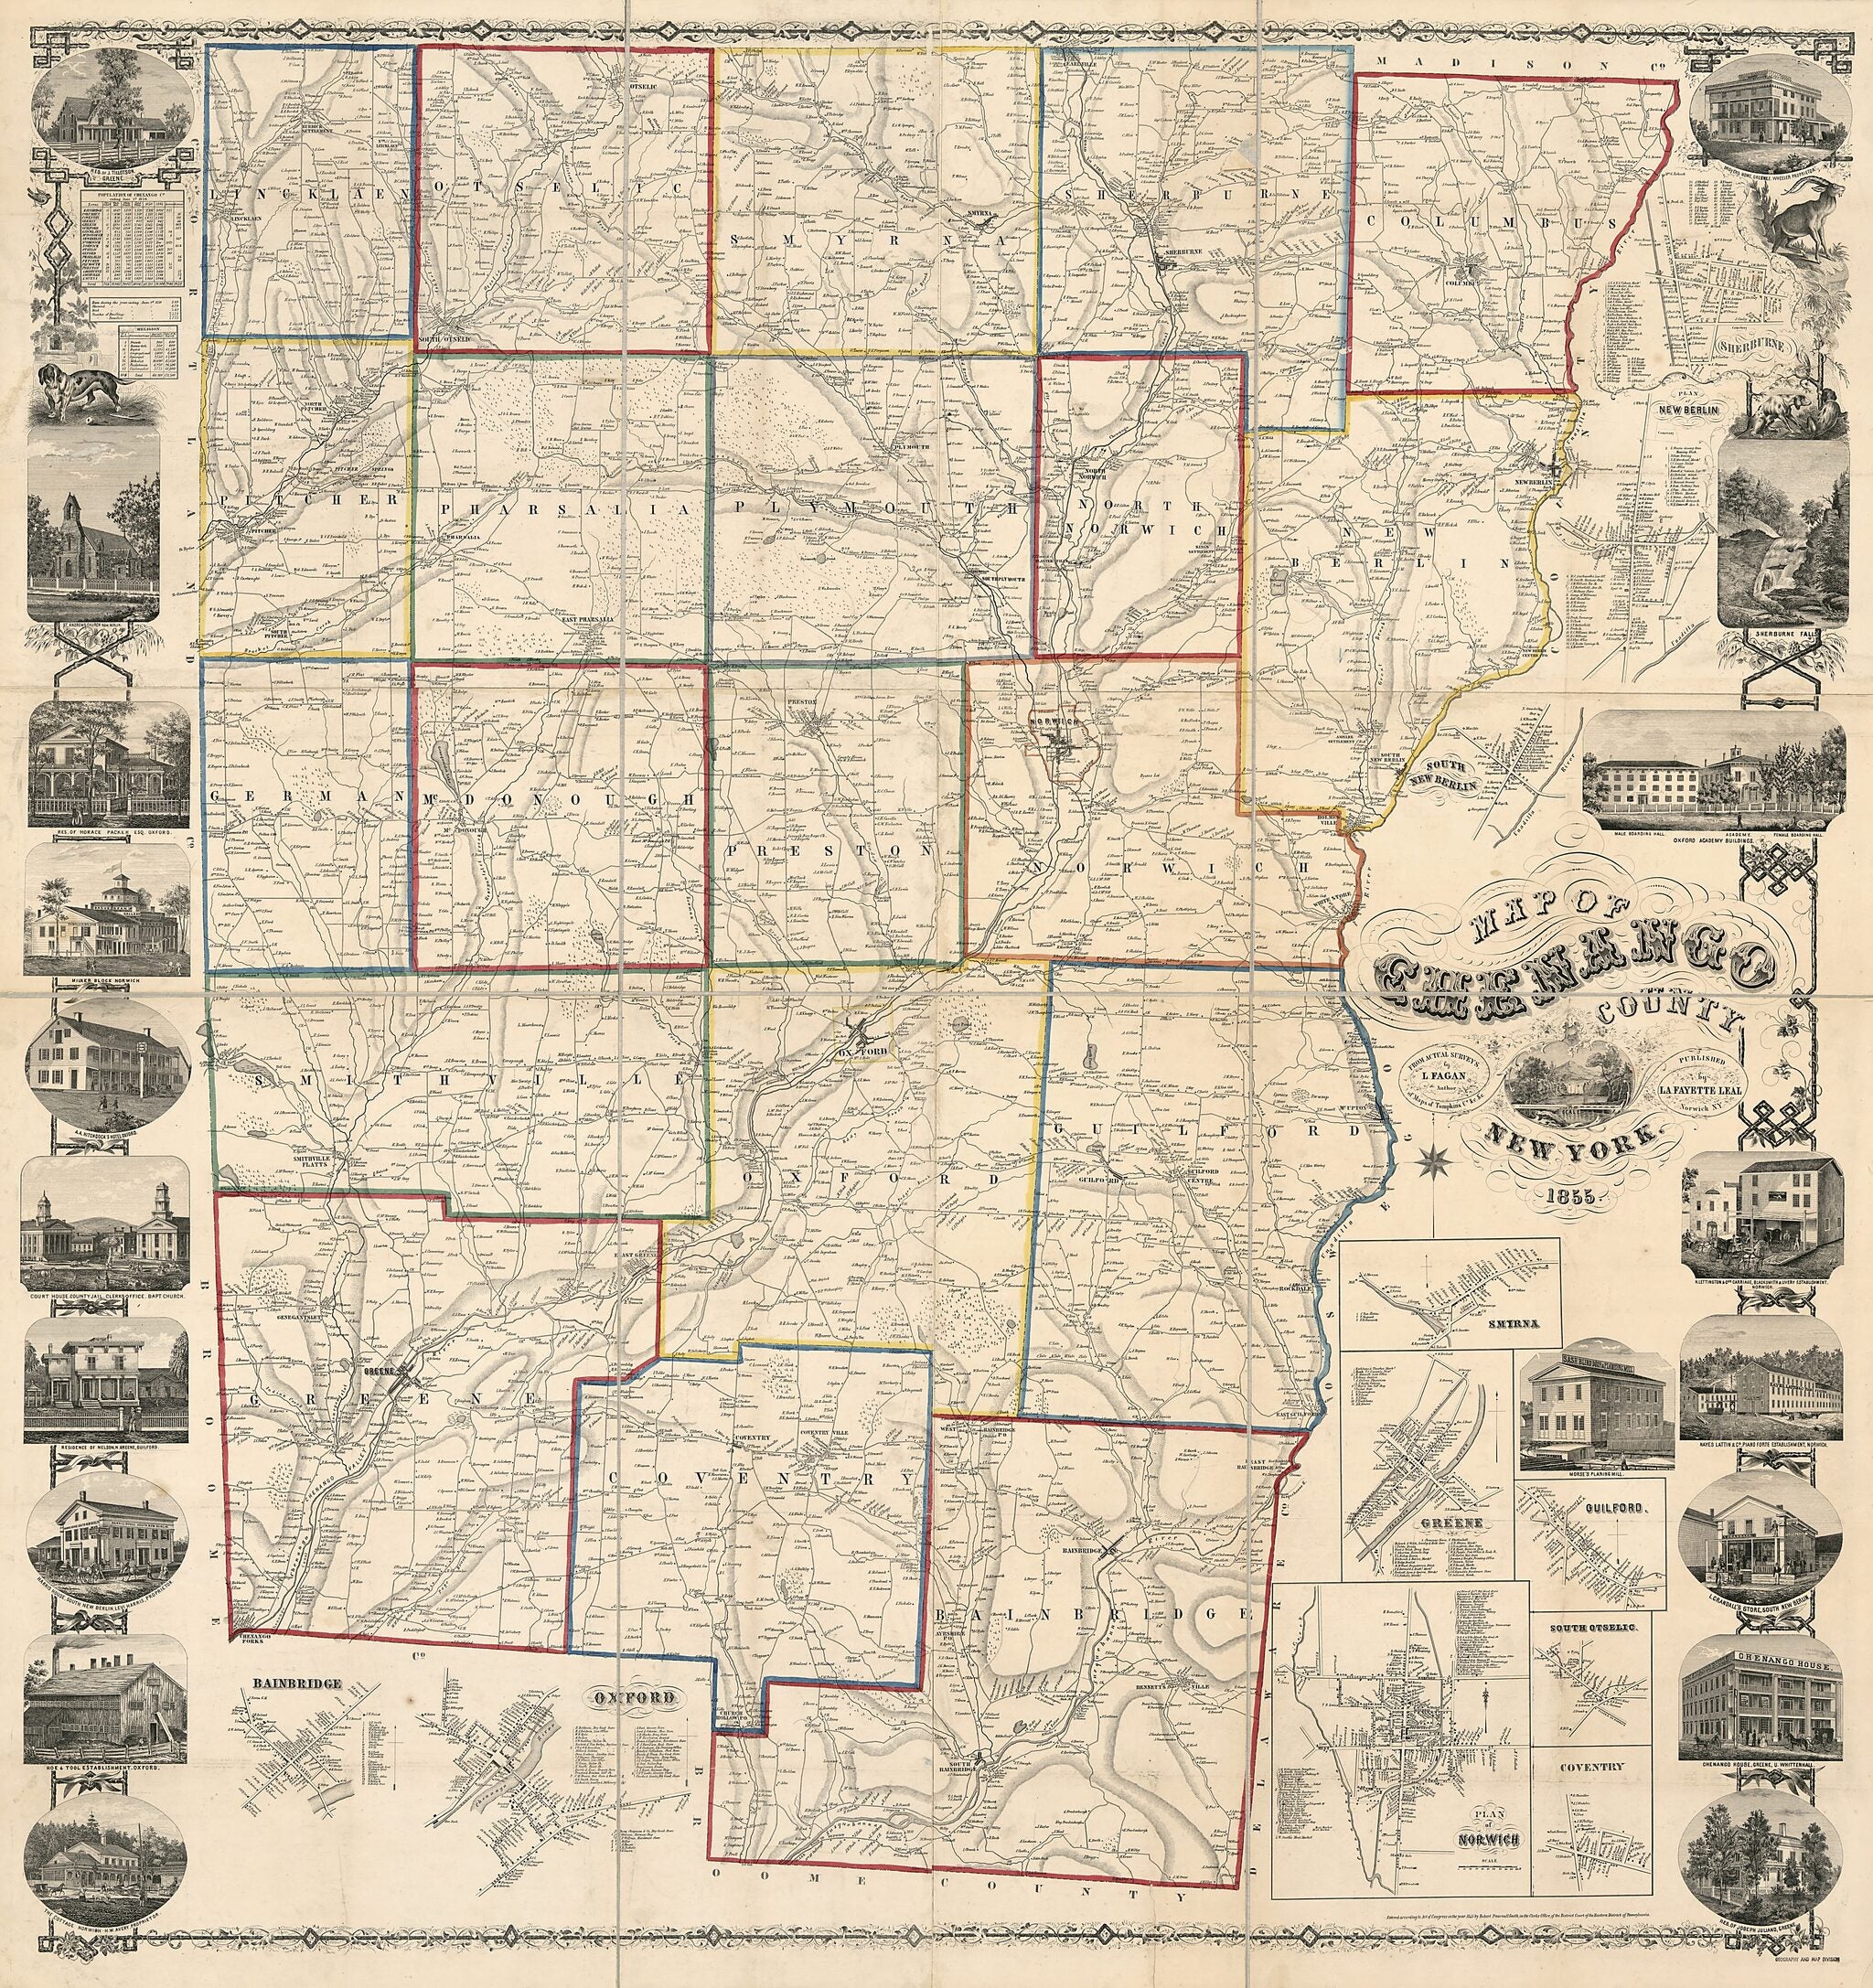 This old map of Map of Chenango County, New York : from Actual Surveys from 1855 was created by L. Fagan in 1855